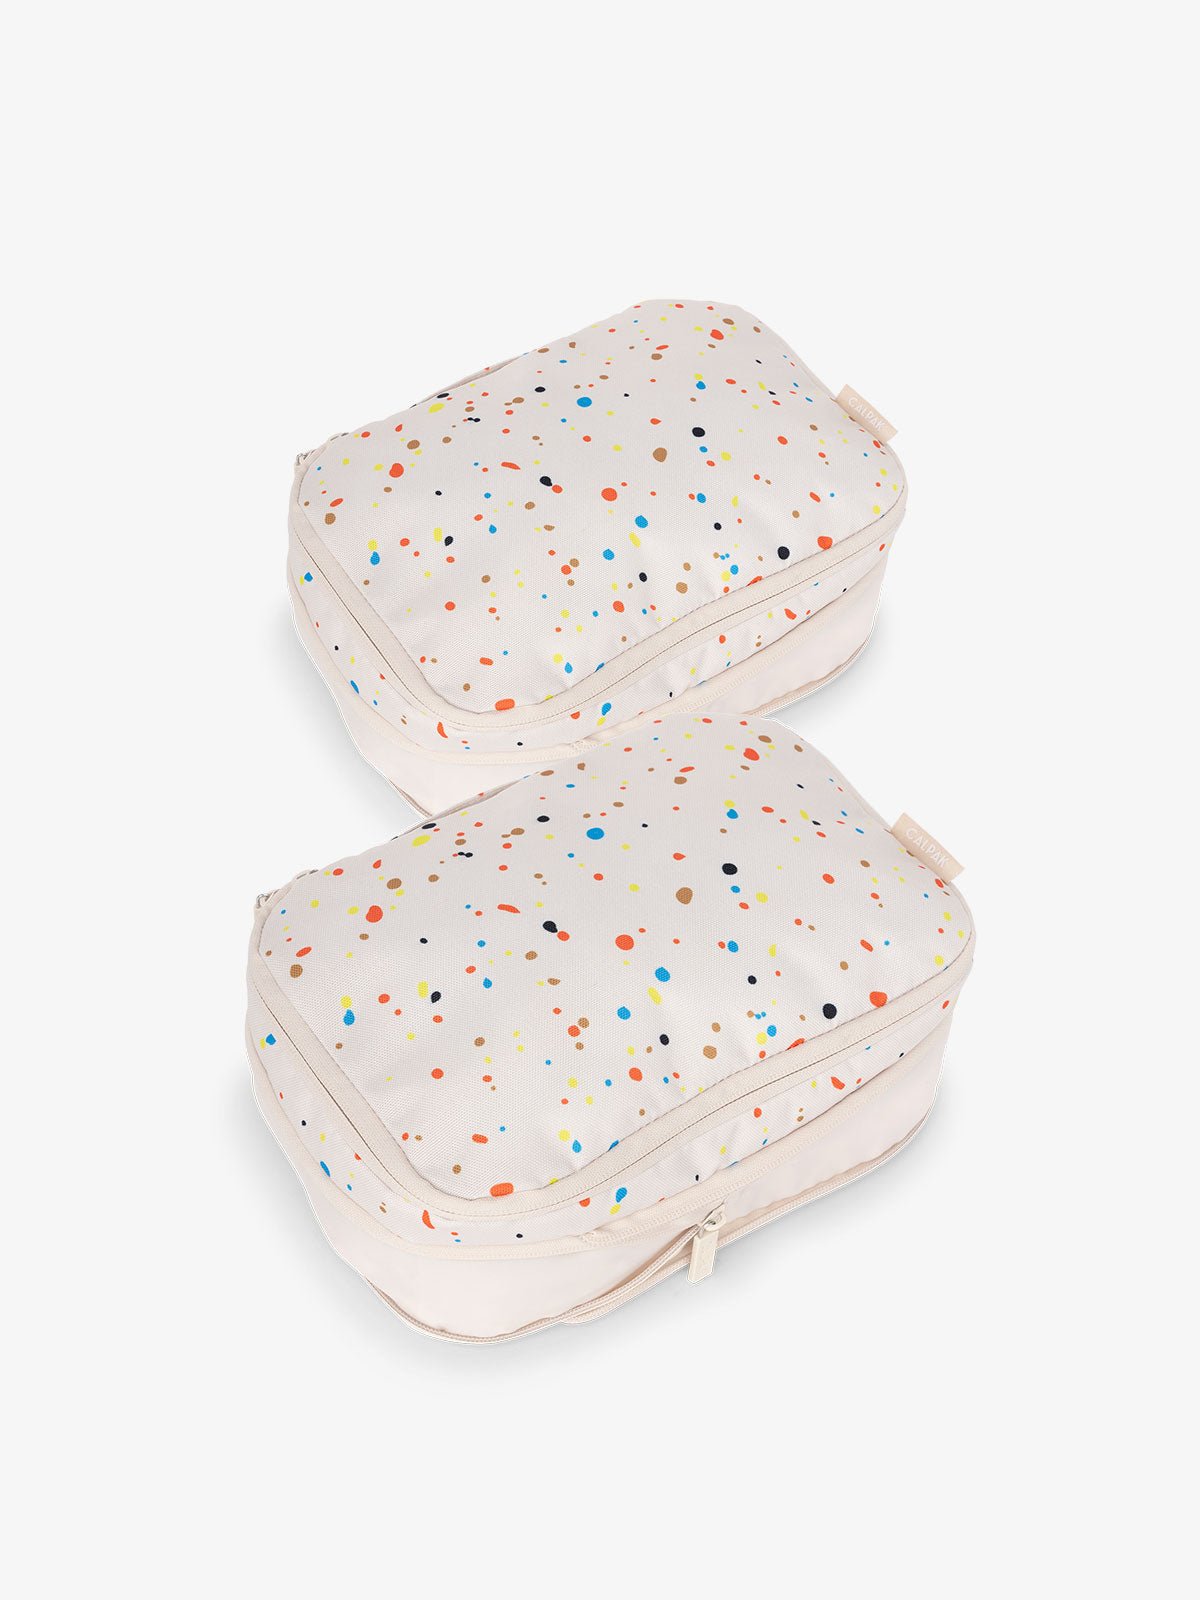 CALPAK small compression packing cubes with top handles and expandable by 4.5 inches in off-white and colorful speckle